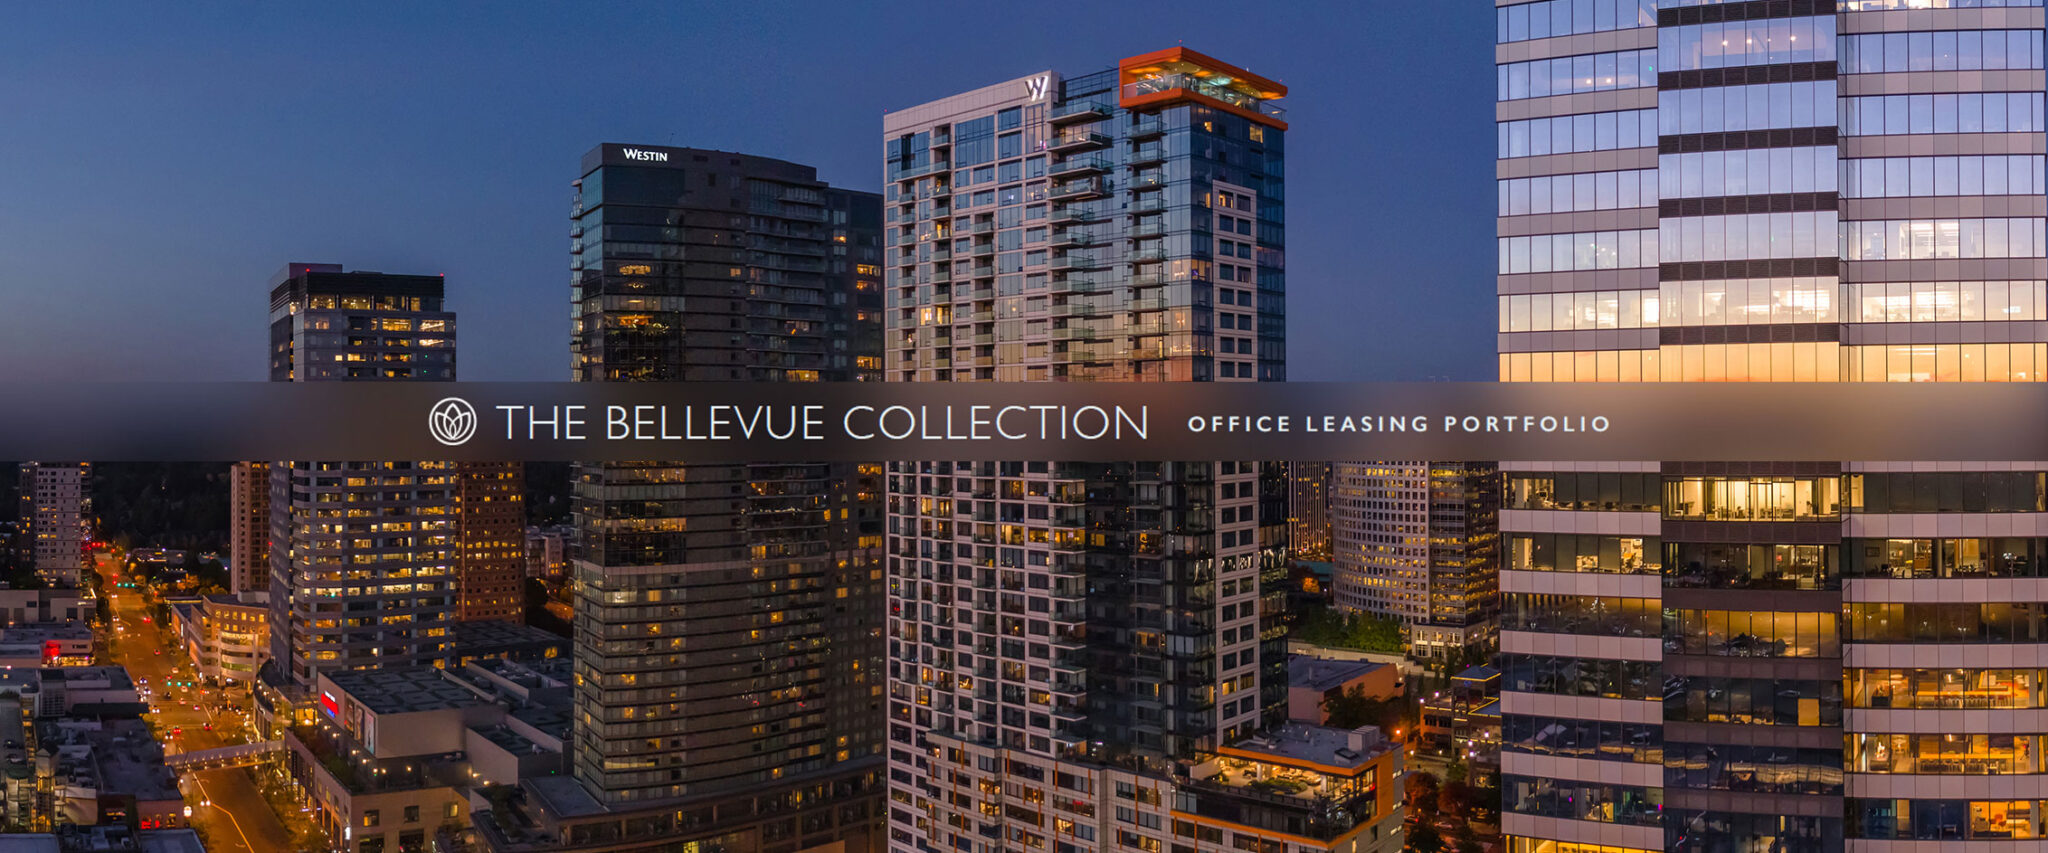 The Bellevue Collection Office Leasing Portfolio